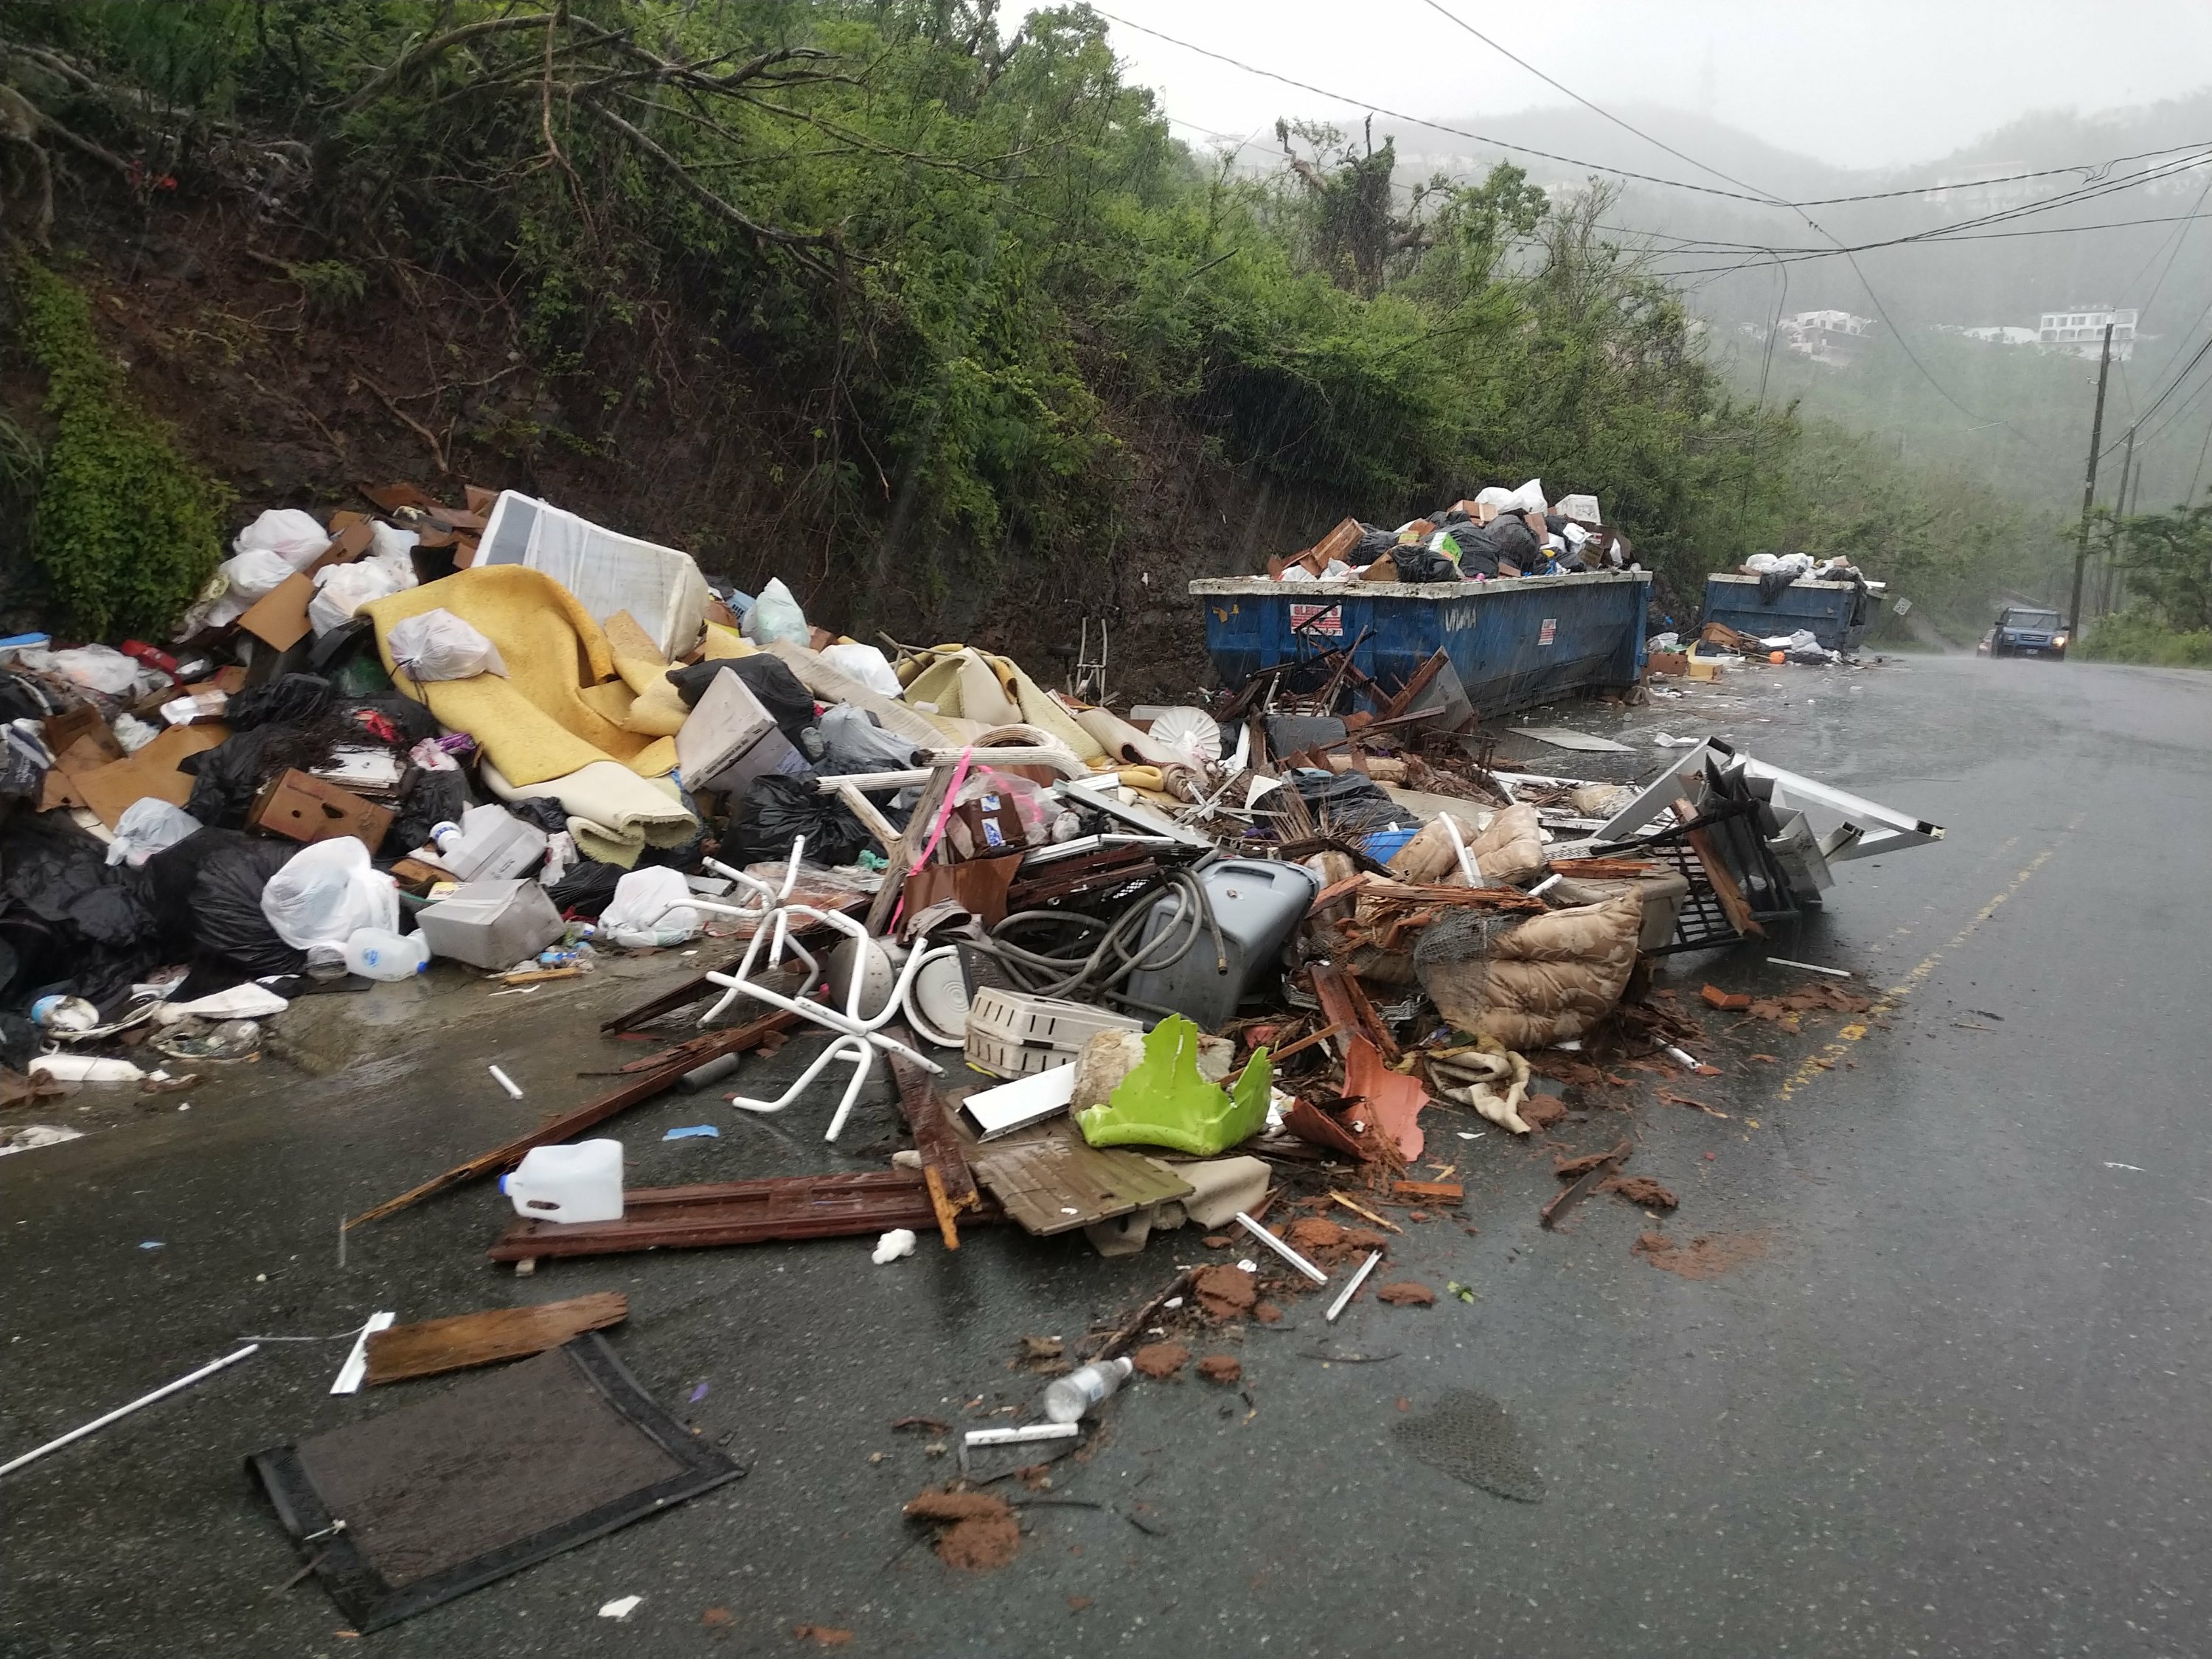 VIWMA Advises St. Thomas and St. John About Solid Waste Pickup Delays